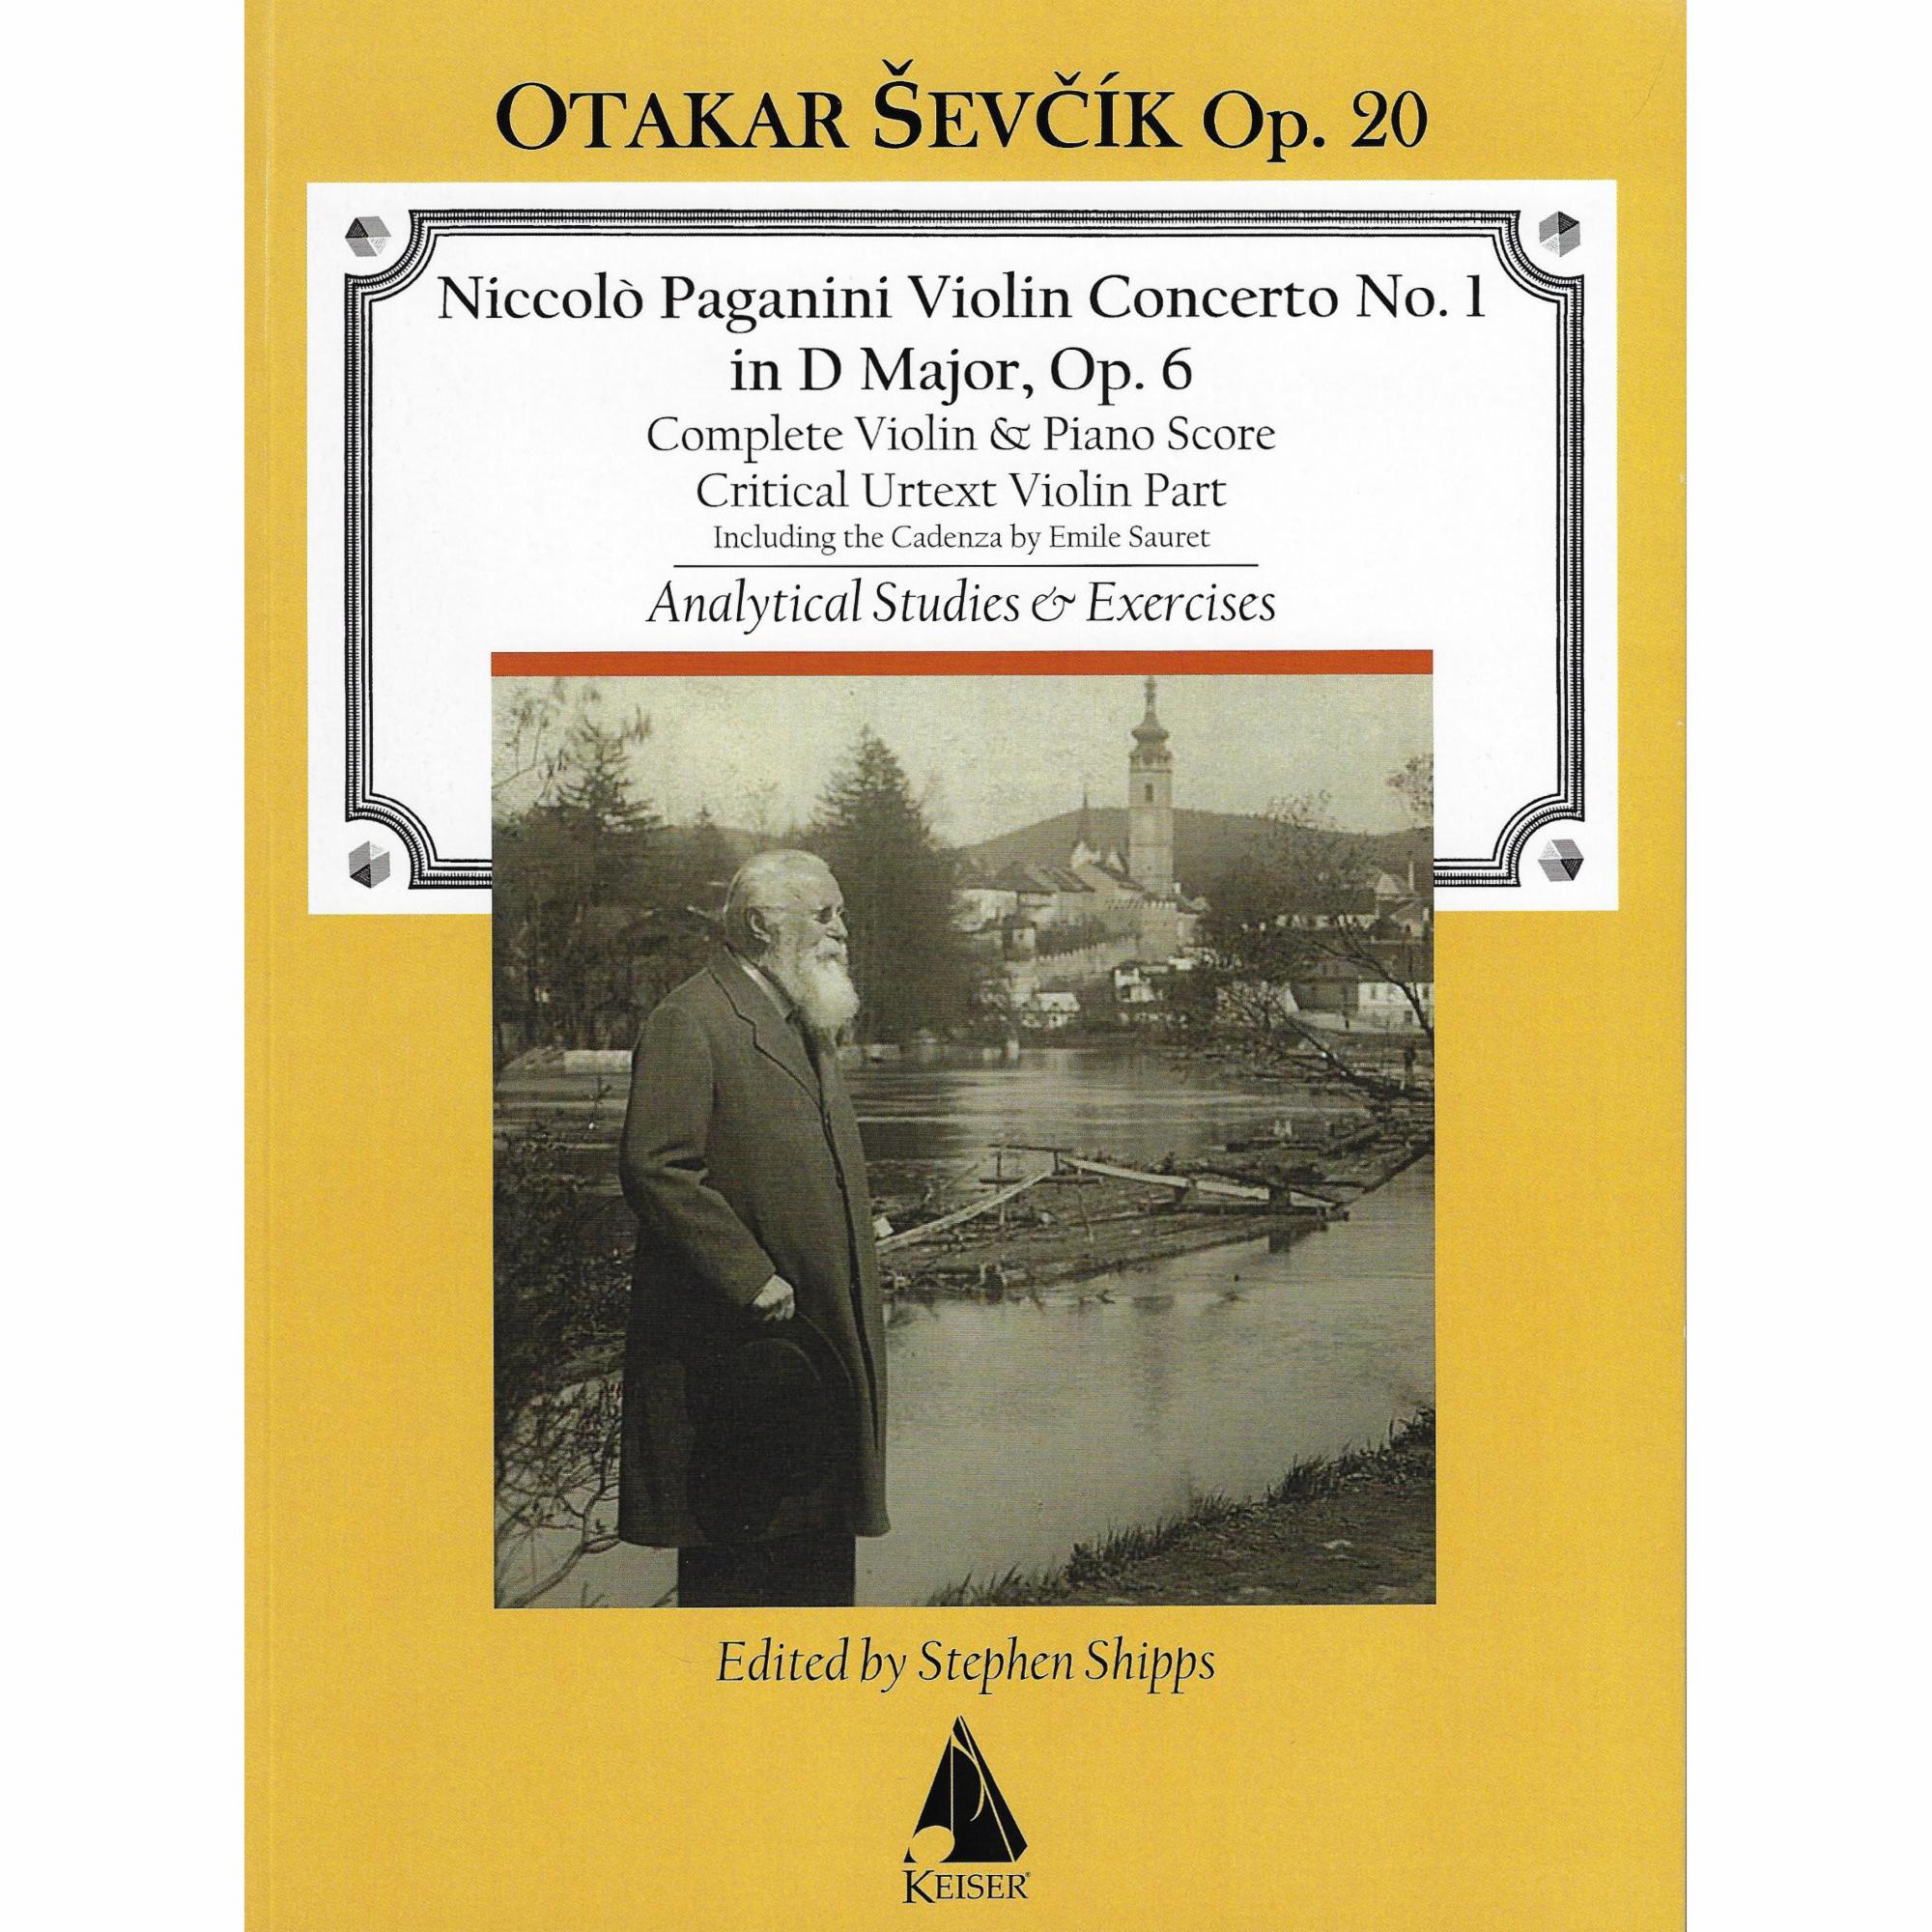 Sevcik -- Analytical Studies & Exercises, Op. 20 (after Paganini Concerto No. 1)